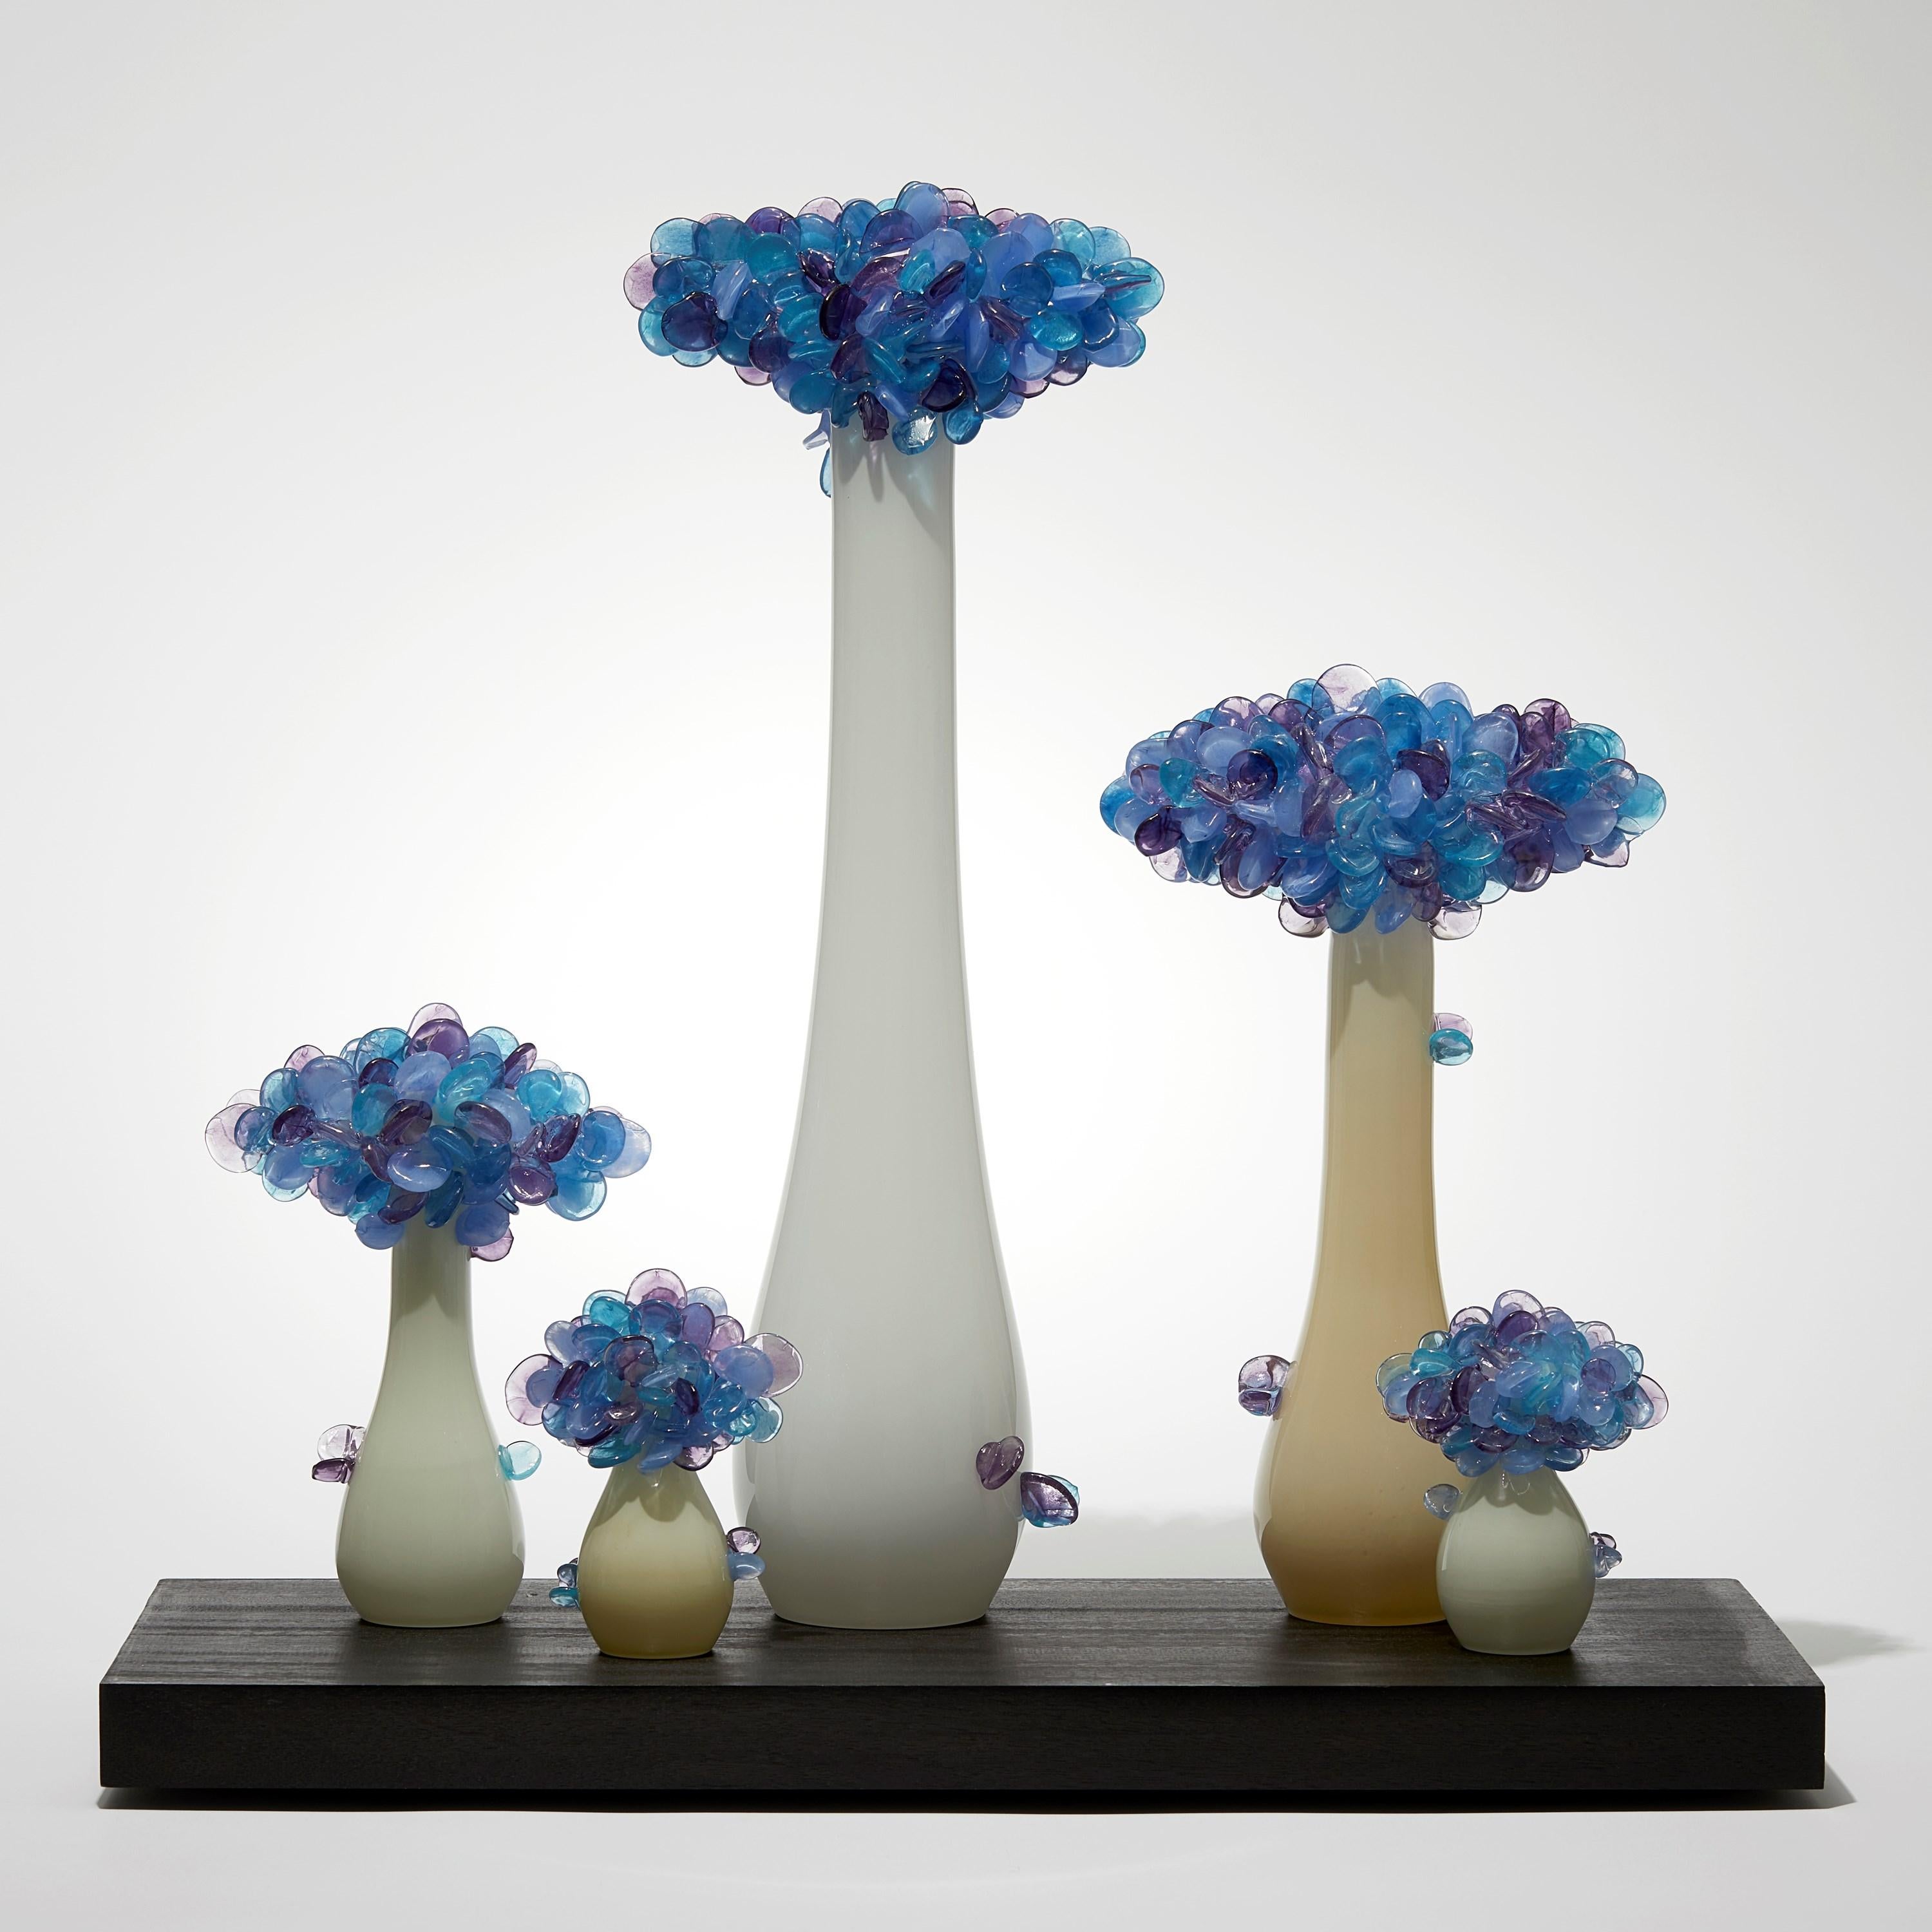 'Enchanted Mori Dawn' is a unique sculpted glass installation by the British artist, Louis Thompson.

Thompson's Enchanted Mori are inspired by the practice of bonsai, echoing its artistic intention to create a higher level of aesthetic refinement.